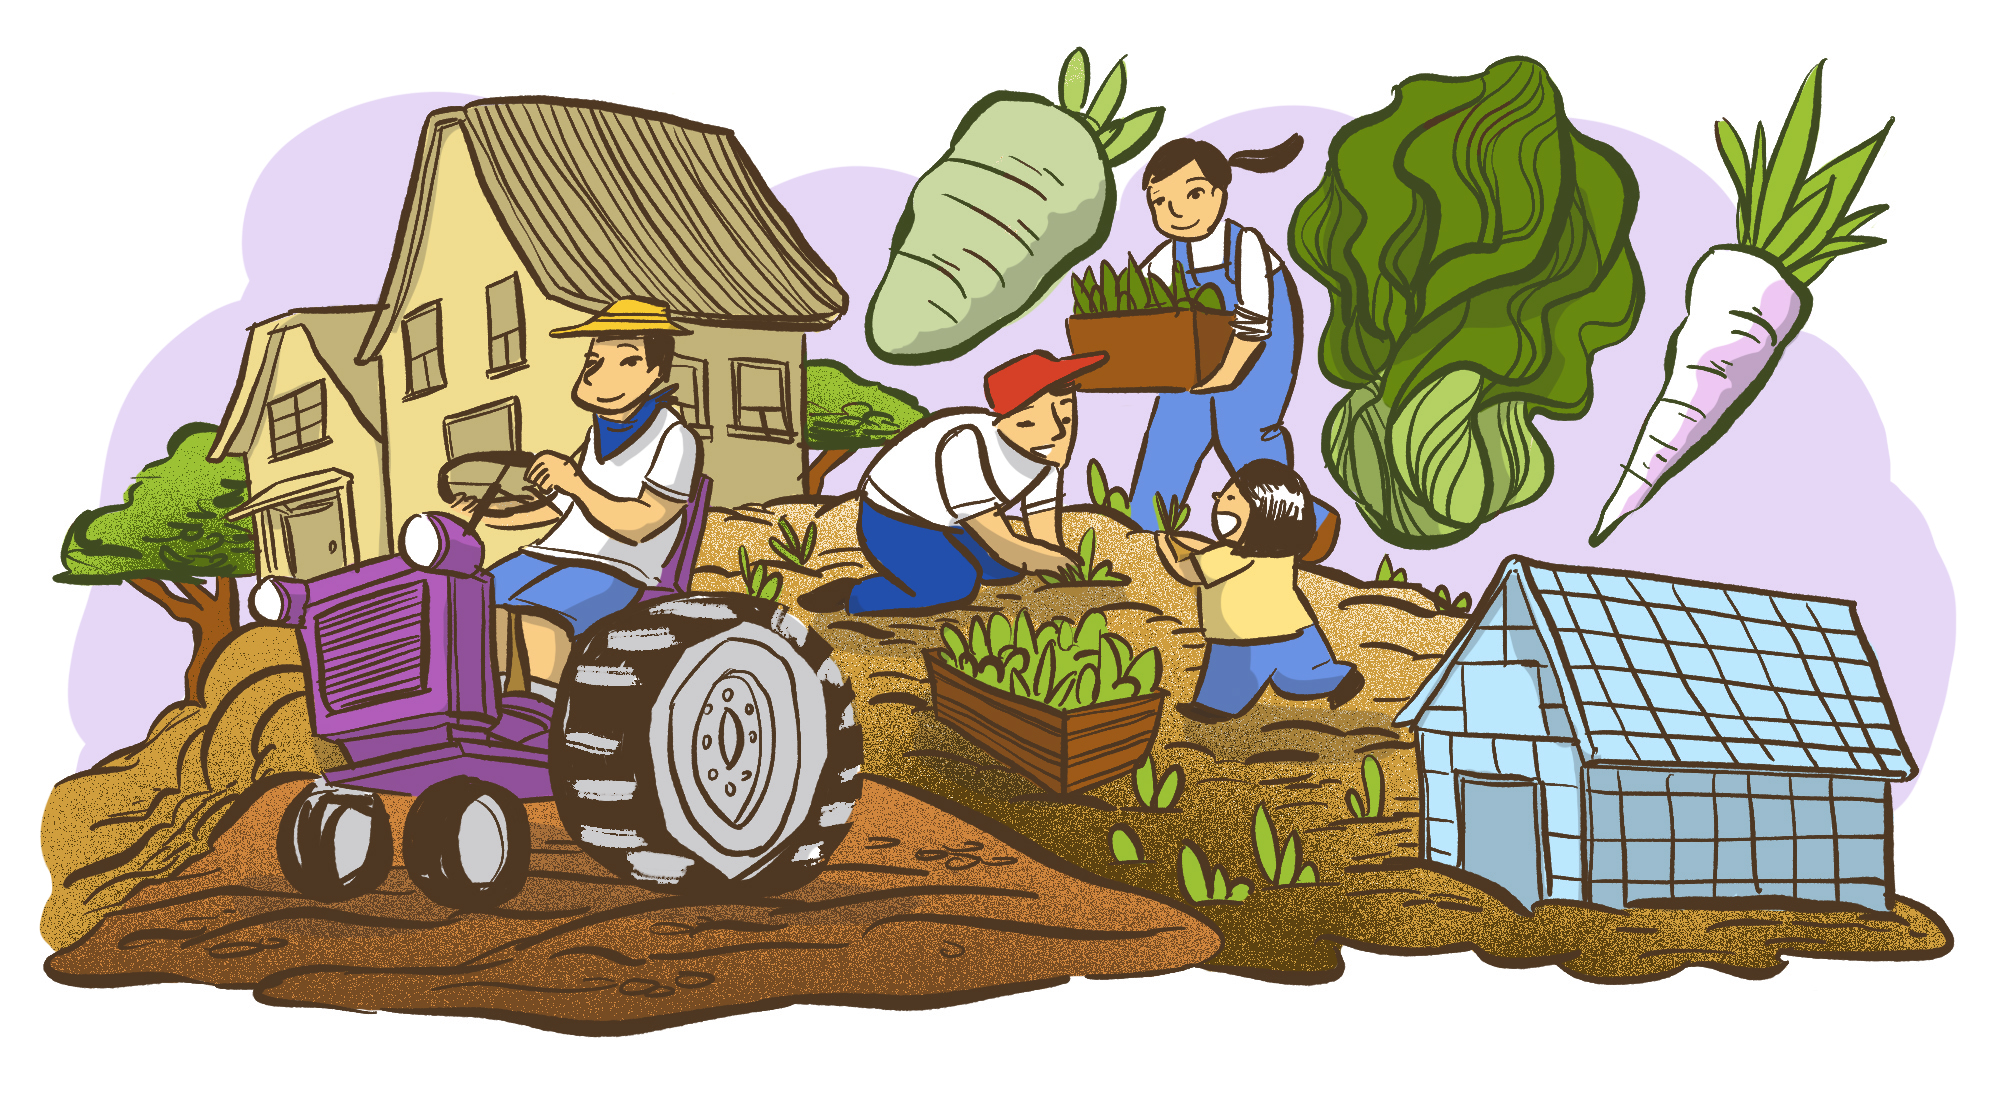 An illustration of Chinese Canadian Farmers working on their farm. On the right hand side is a glass green house, and a family is picking vegetable outside. The background depict several important Chinese vegetable: Bok Choy, Daikon etc. On the left hand side is a farm house and a farmer driving a truck on their farm.